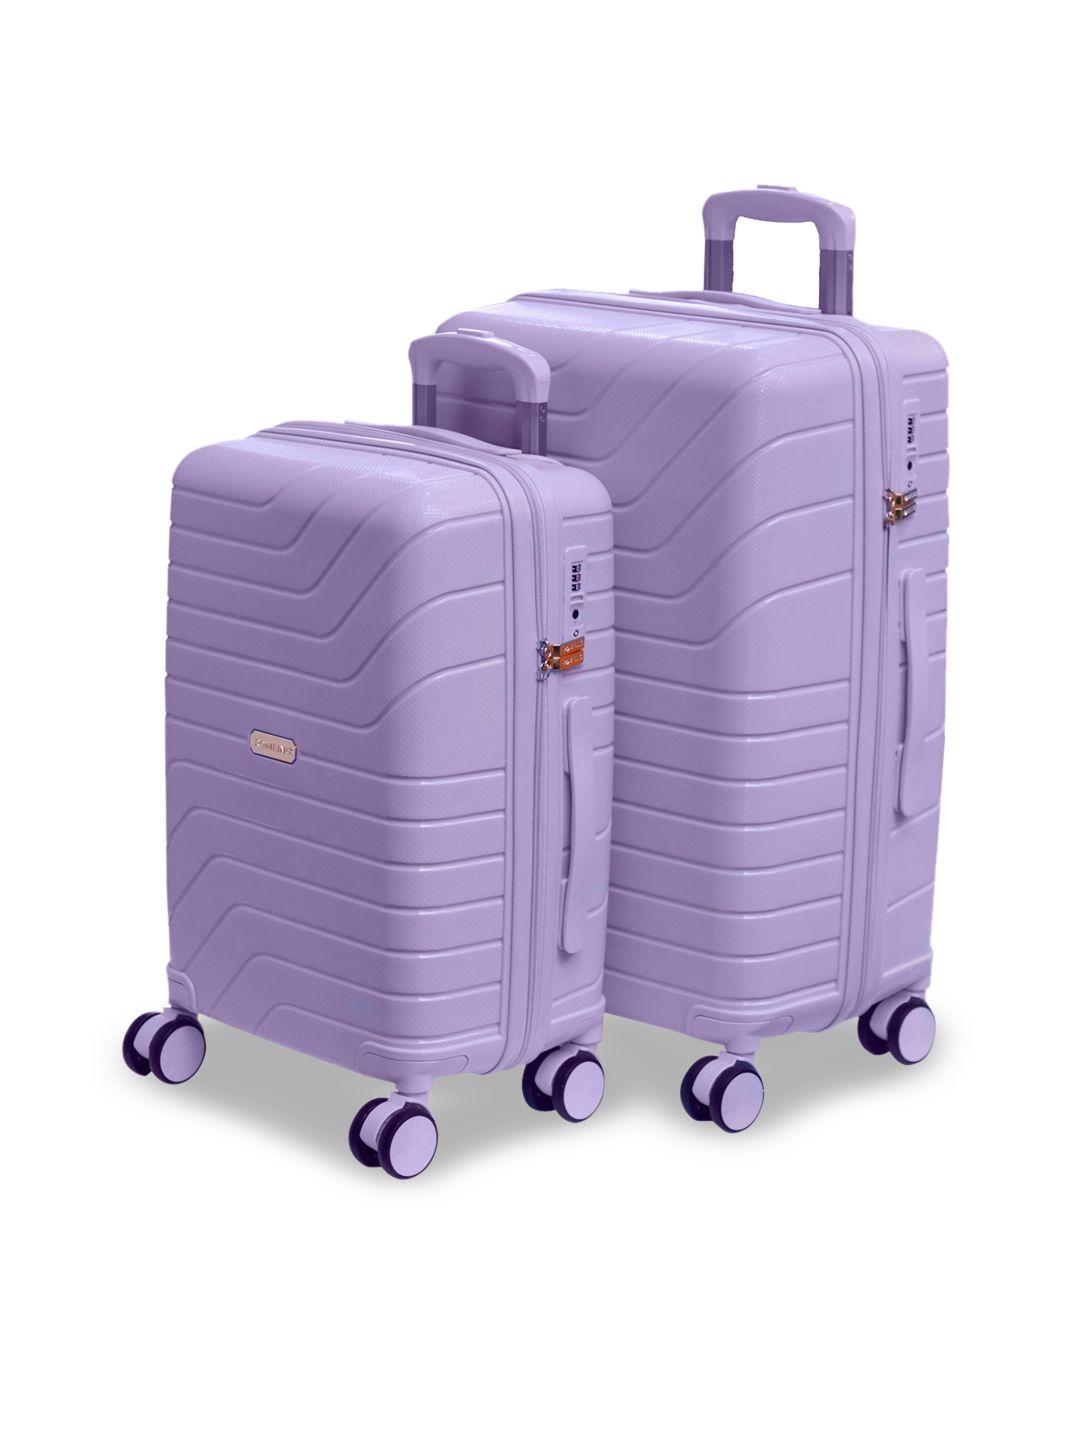 romeing tuscany set of 2 tuscany textured hard-sided trolley suitcases